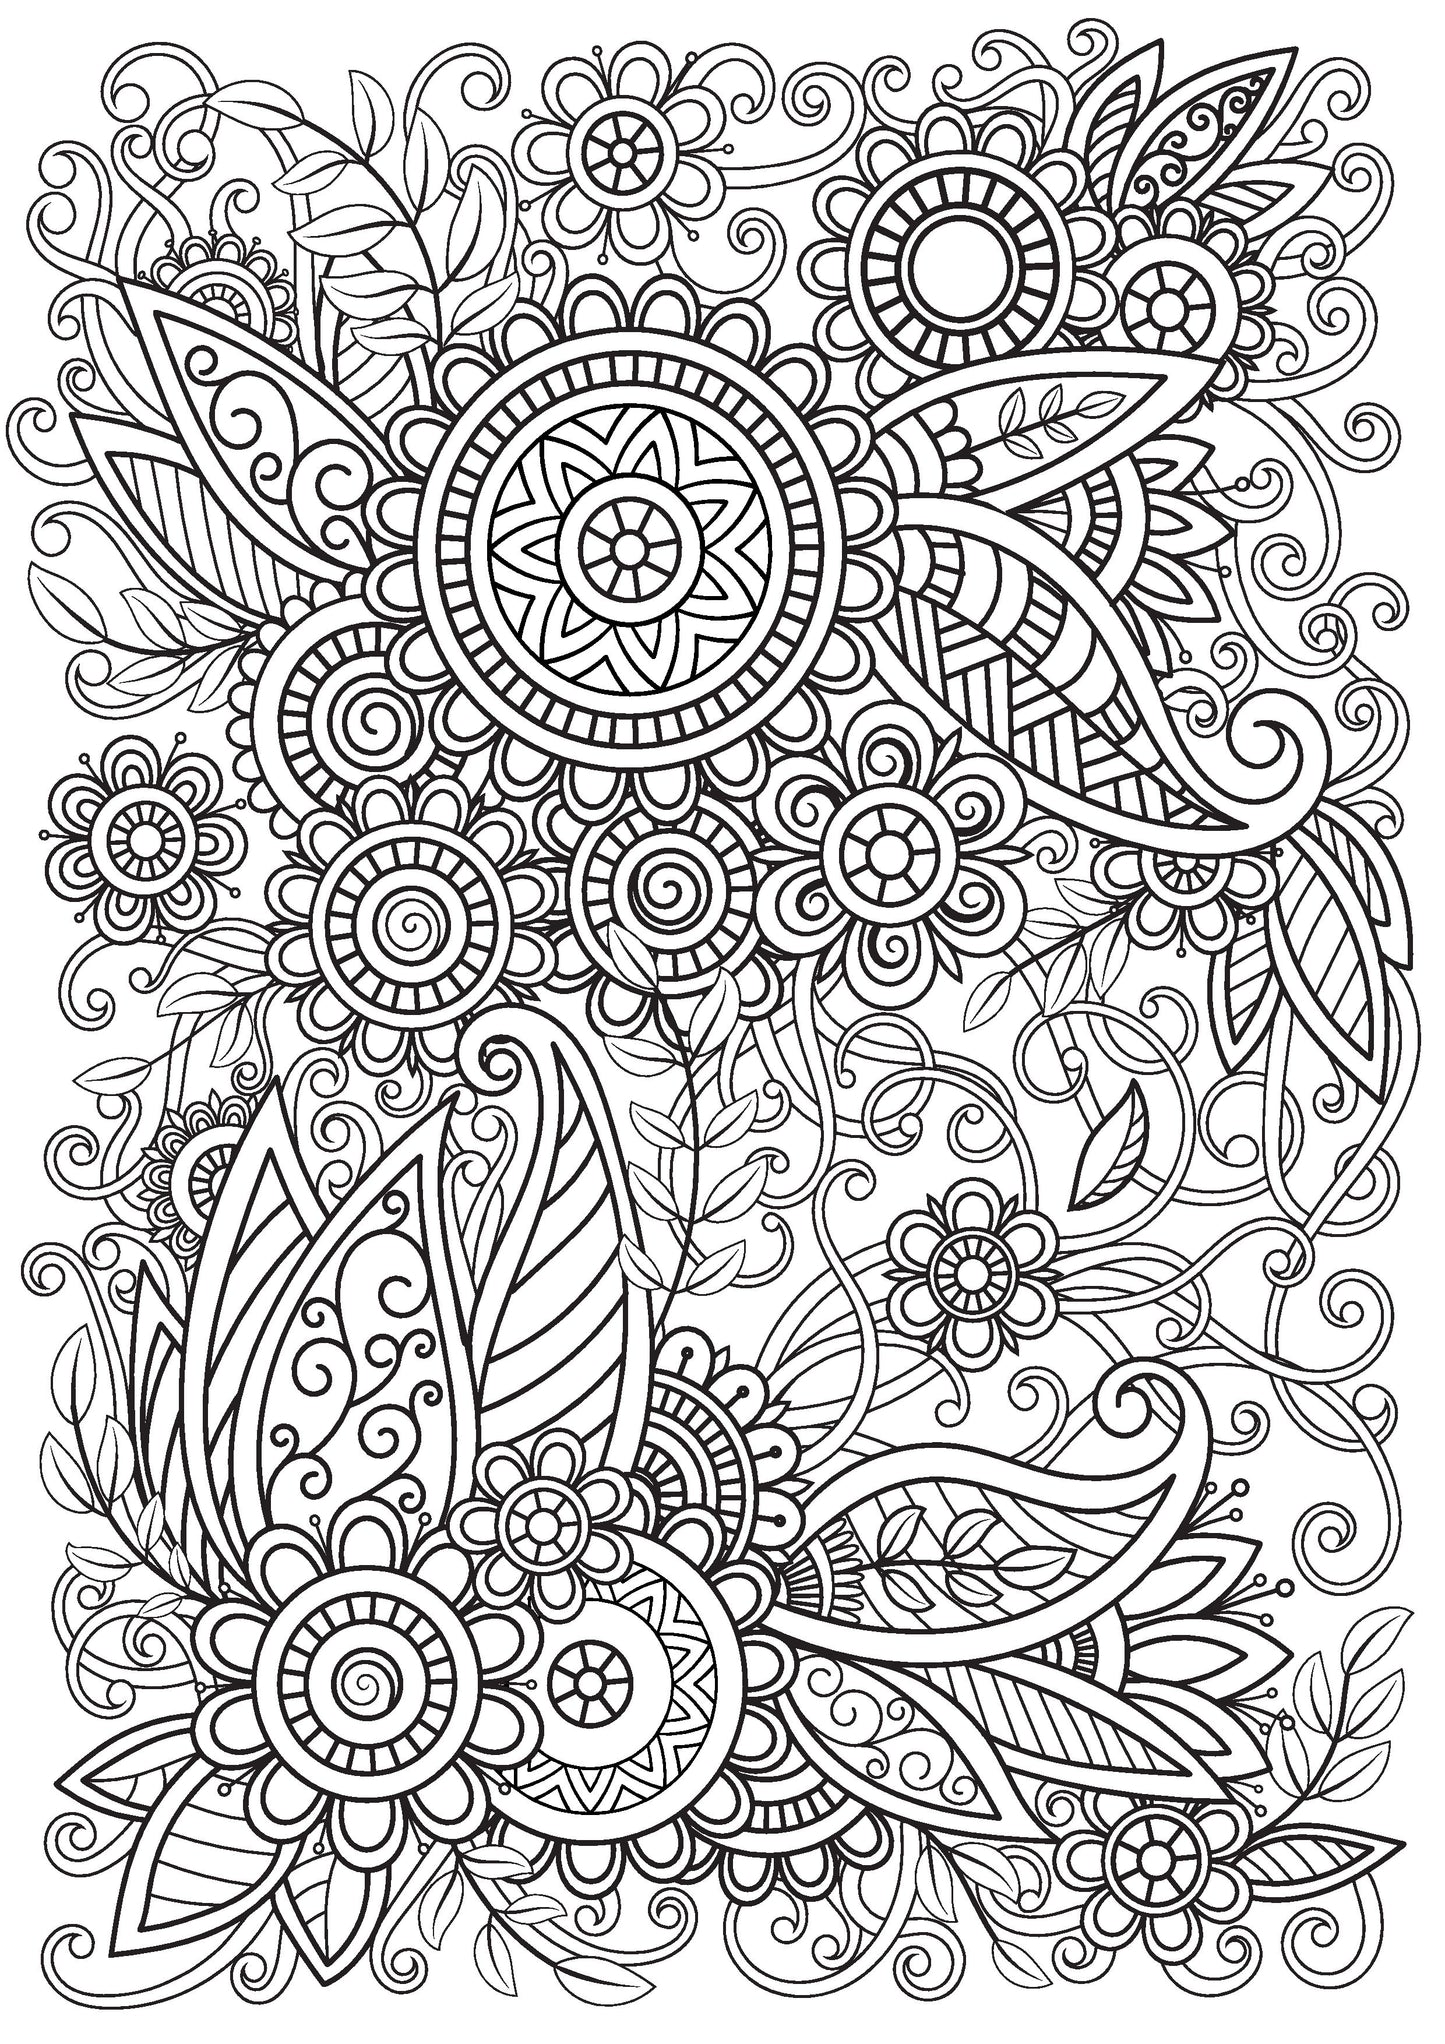 Colouring Book, General Mindful Illustrations